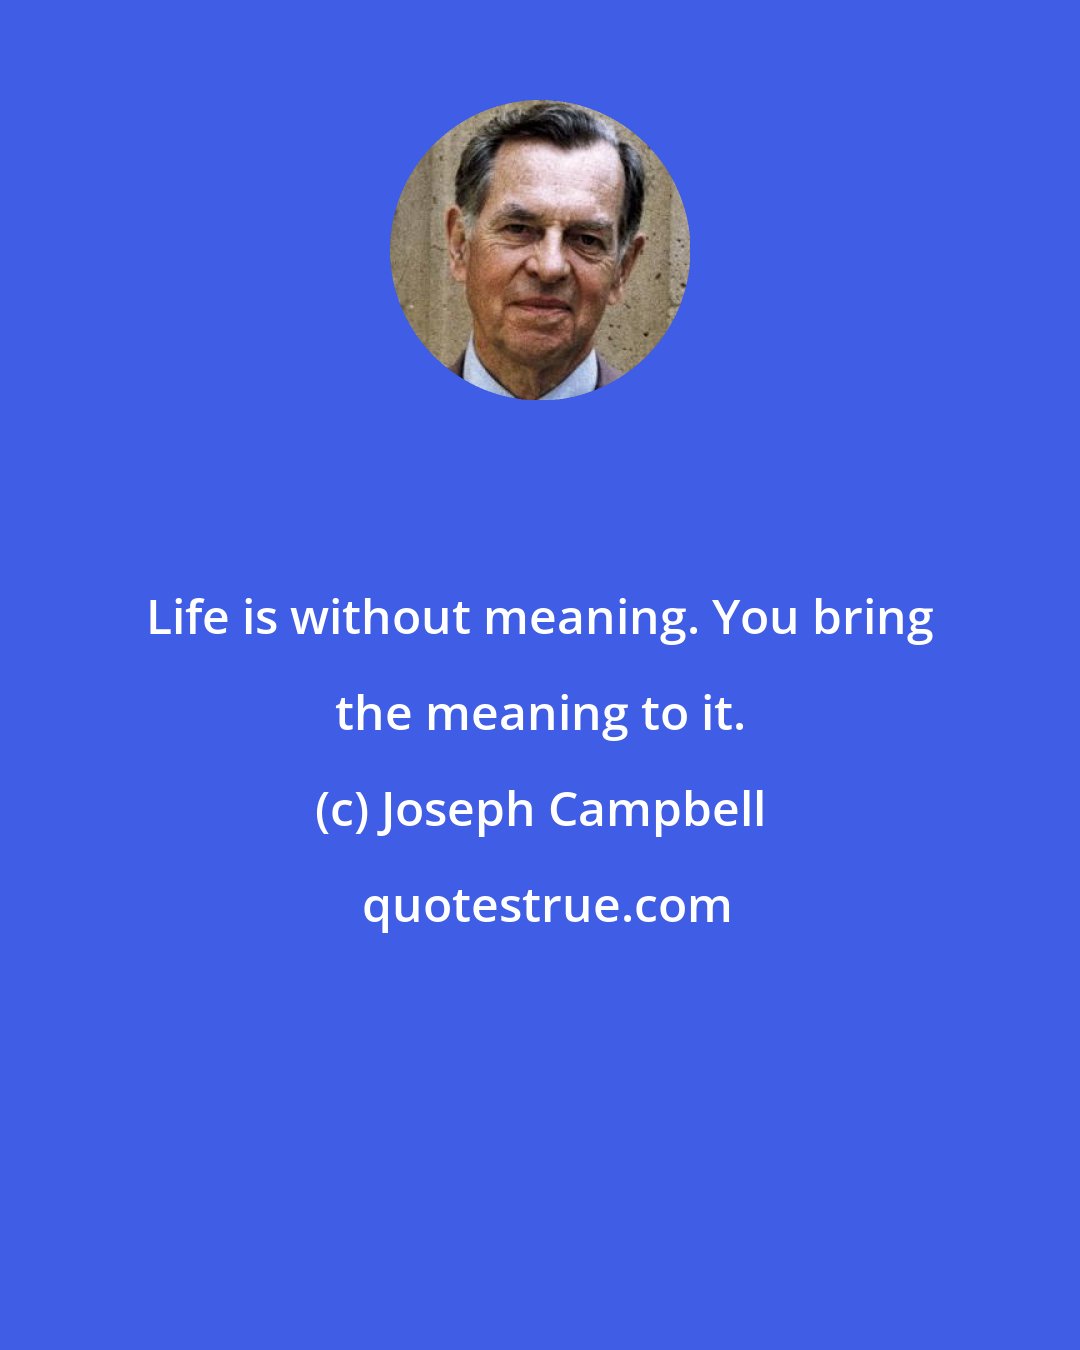 Joseph Campbell: Life is without meaning. You bring the meaning to it.